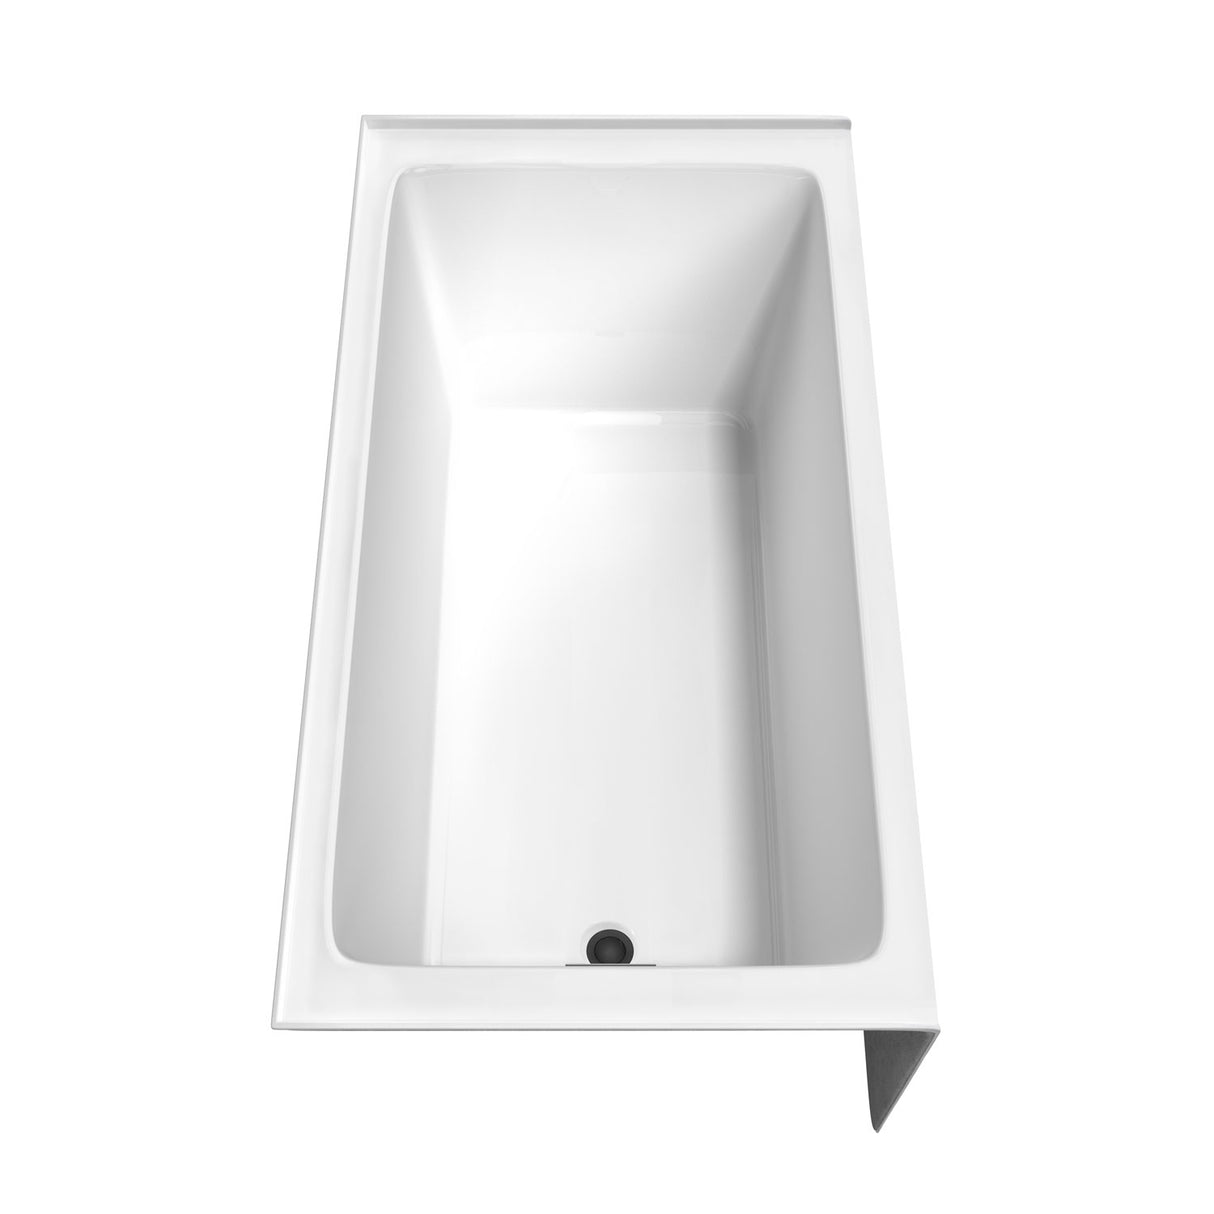 Grayley 60 x 32 Inch Alcove Bathtub in White with Left-Hand Drain and Overflow Trim in Matte Black